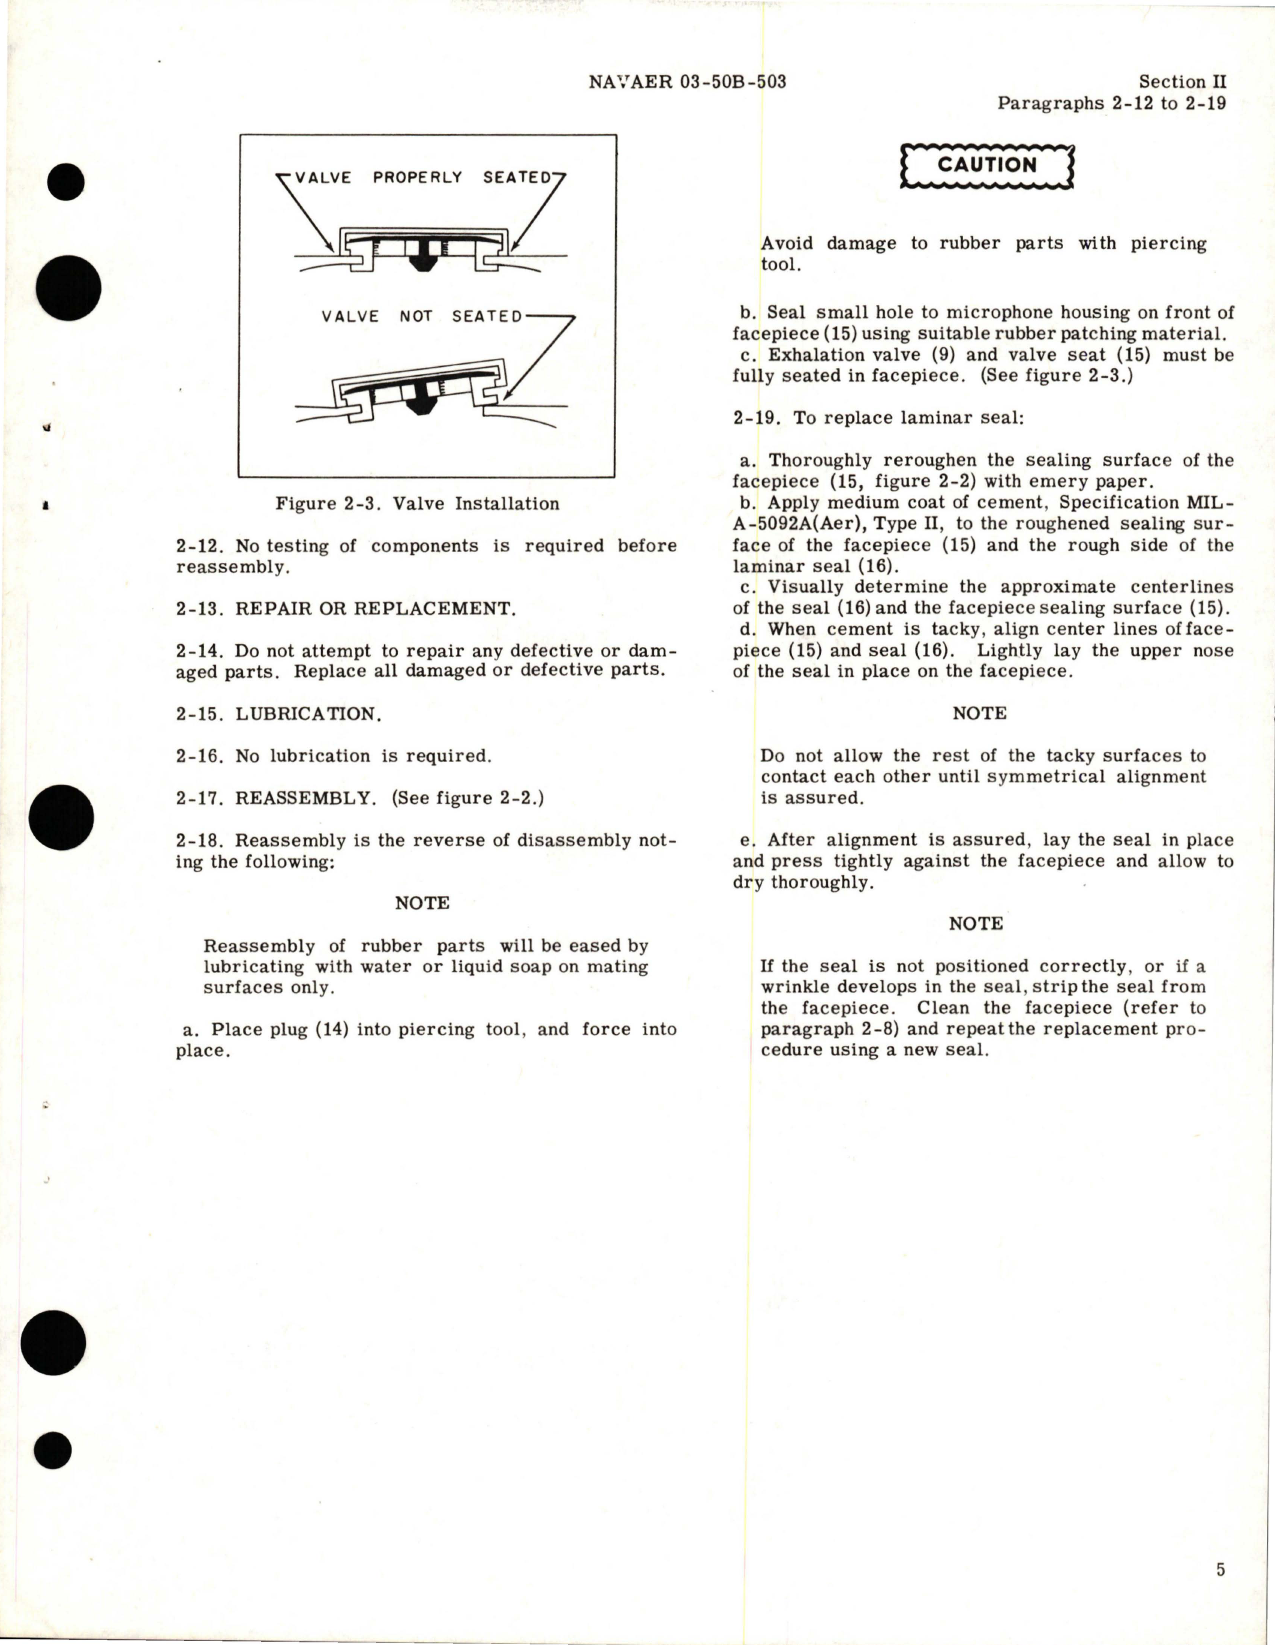 Sample page 7 from AirCorps Library document: Overhaul Instructions for Pressure Breathing Oxygen Mask - Type MS 22001 - Part 77900, 77901, and 77902 